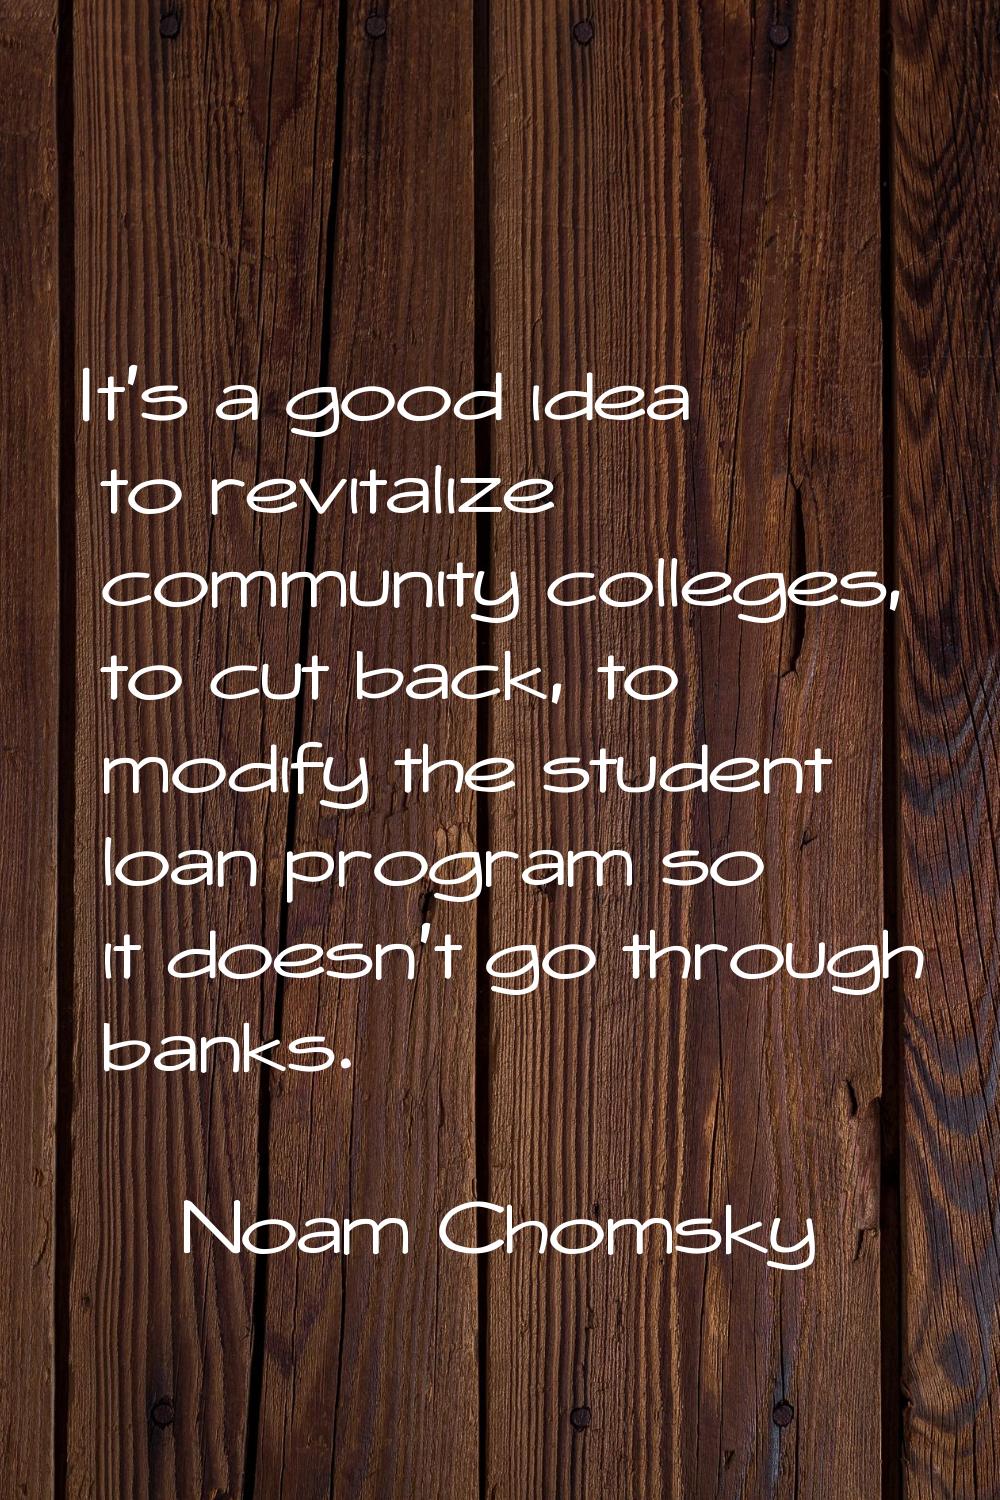 It's a good idea to revitalize community colleges, to cut back, to modify the student loan program 